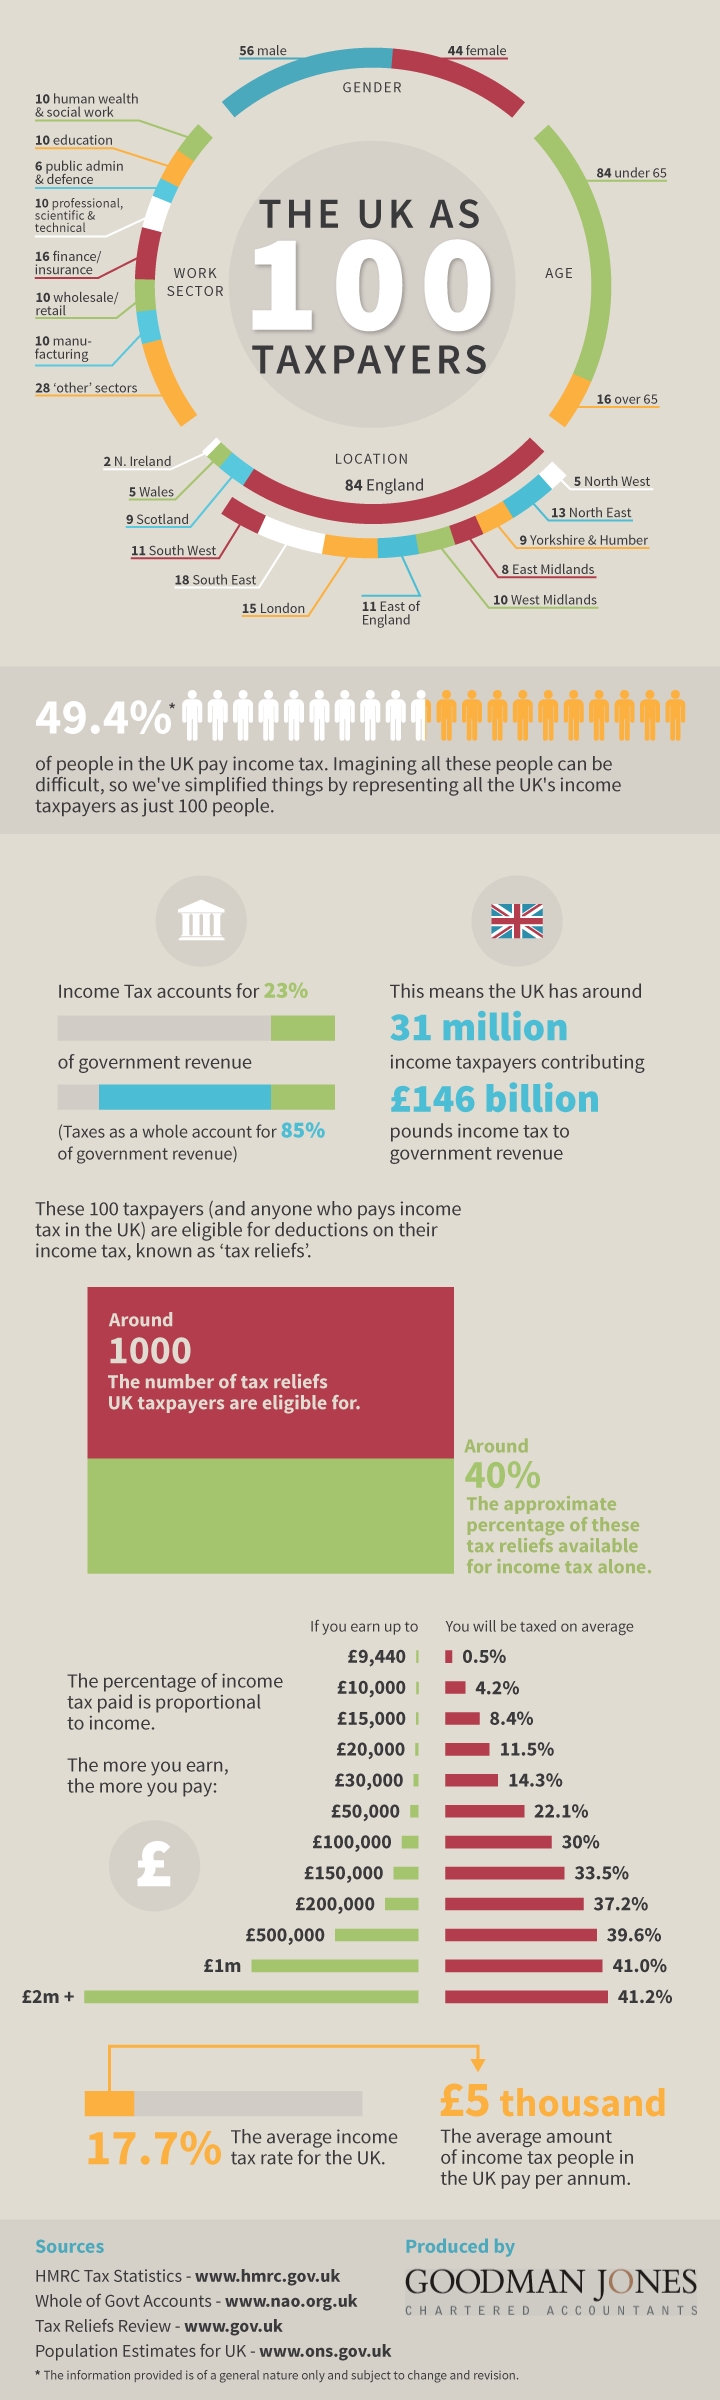 The UK as 100 taxpayers